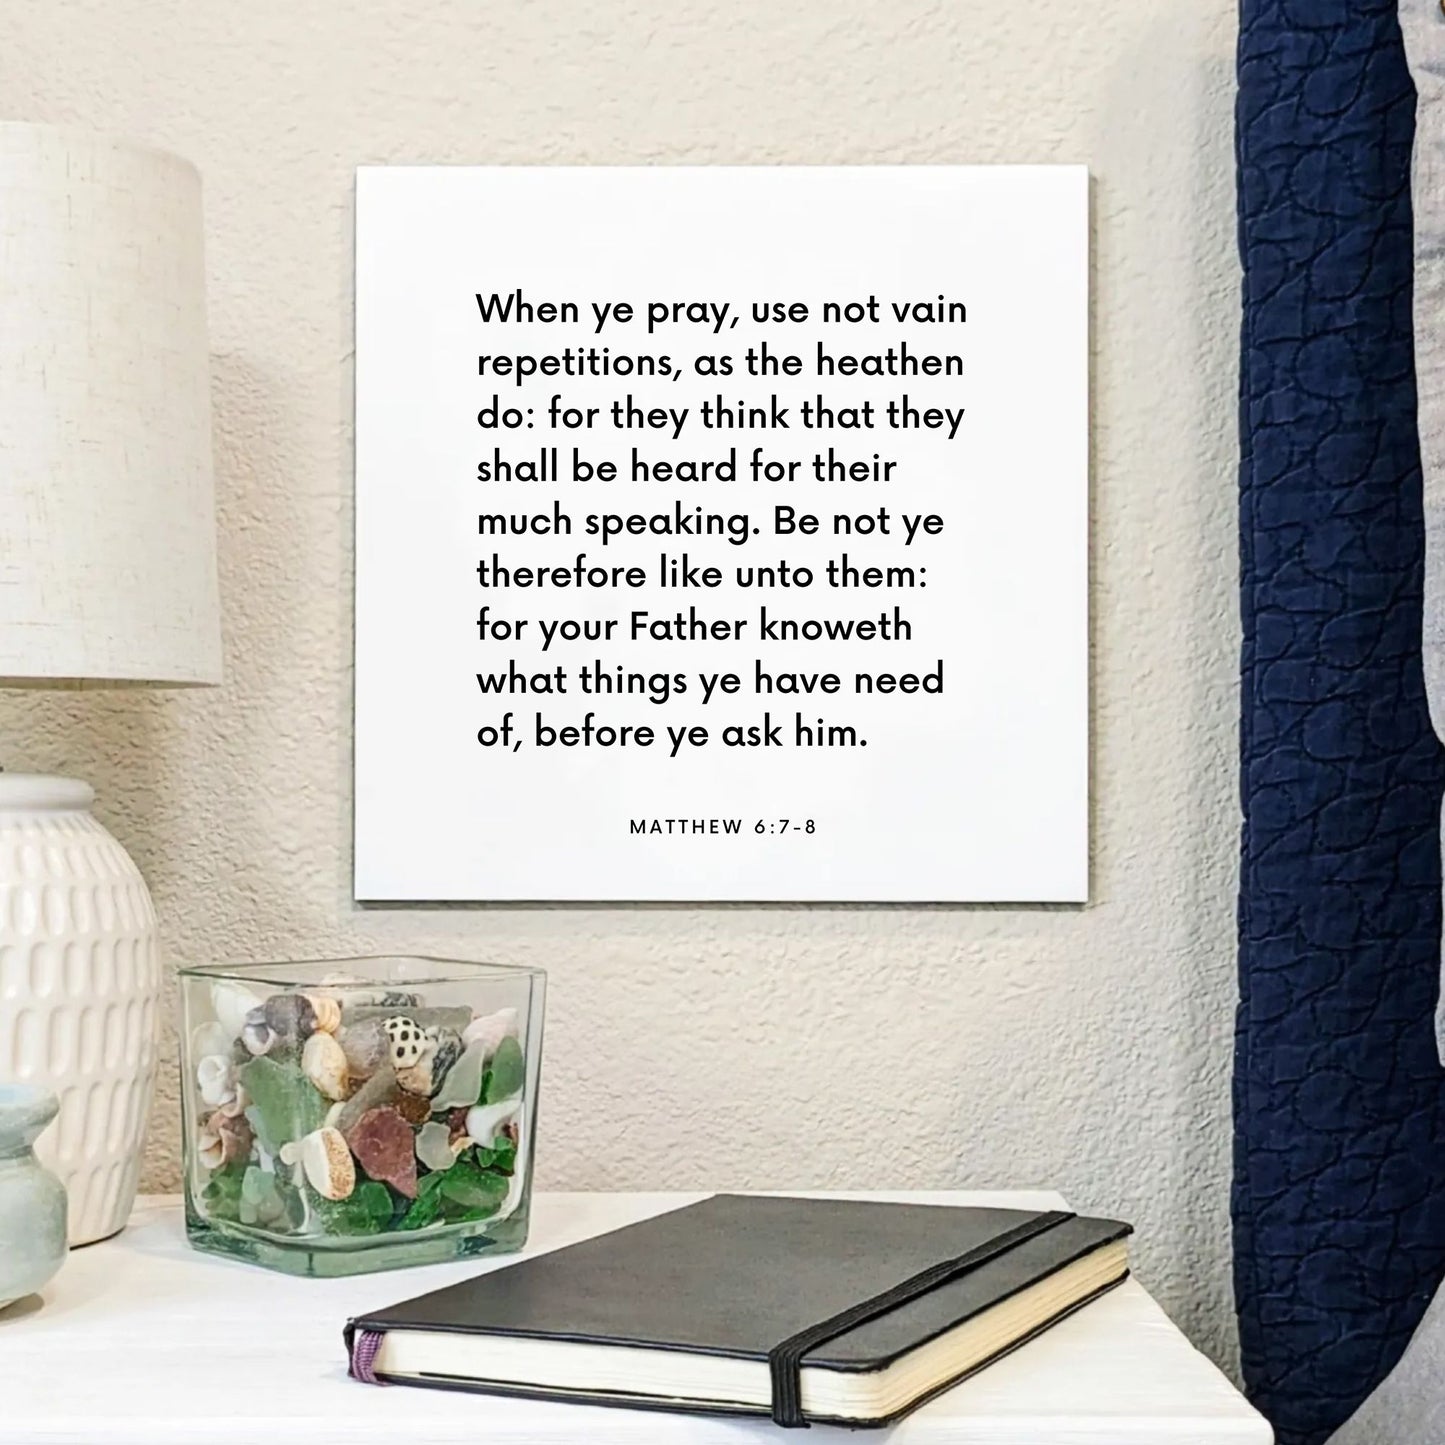 Bedside mouting of the scripture tile for Matthew 6:7-8 - "Your Father knoweth what things ye have need of"